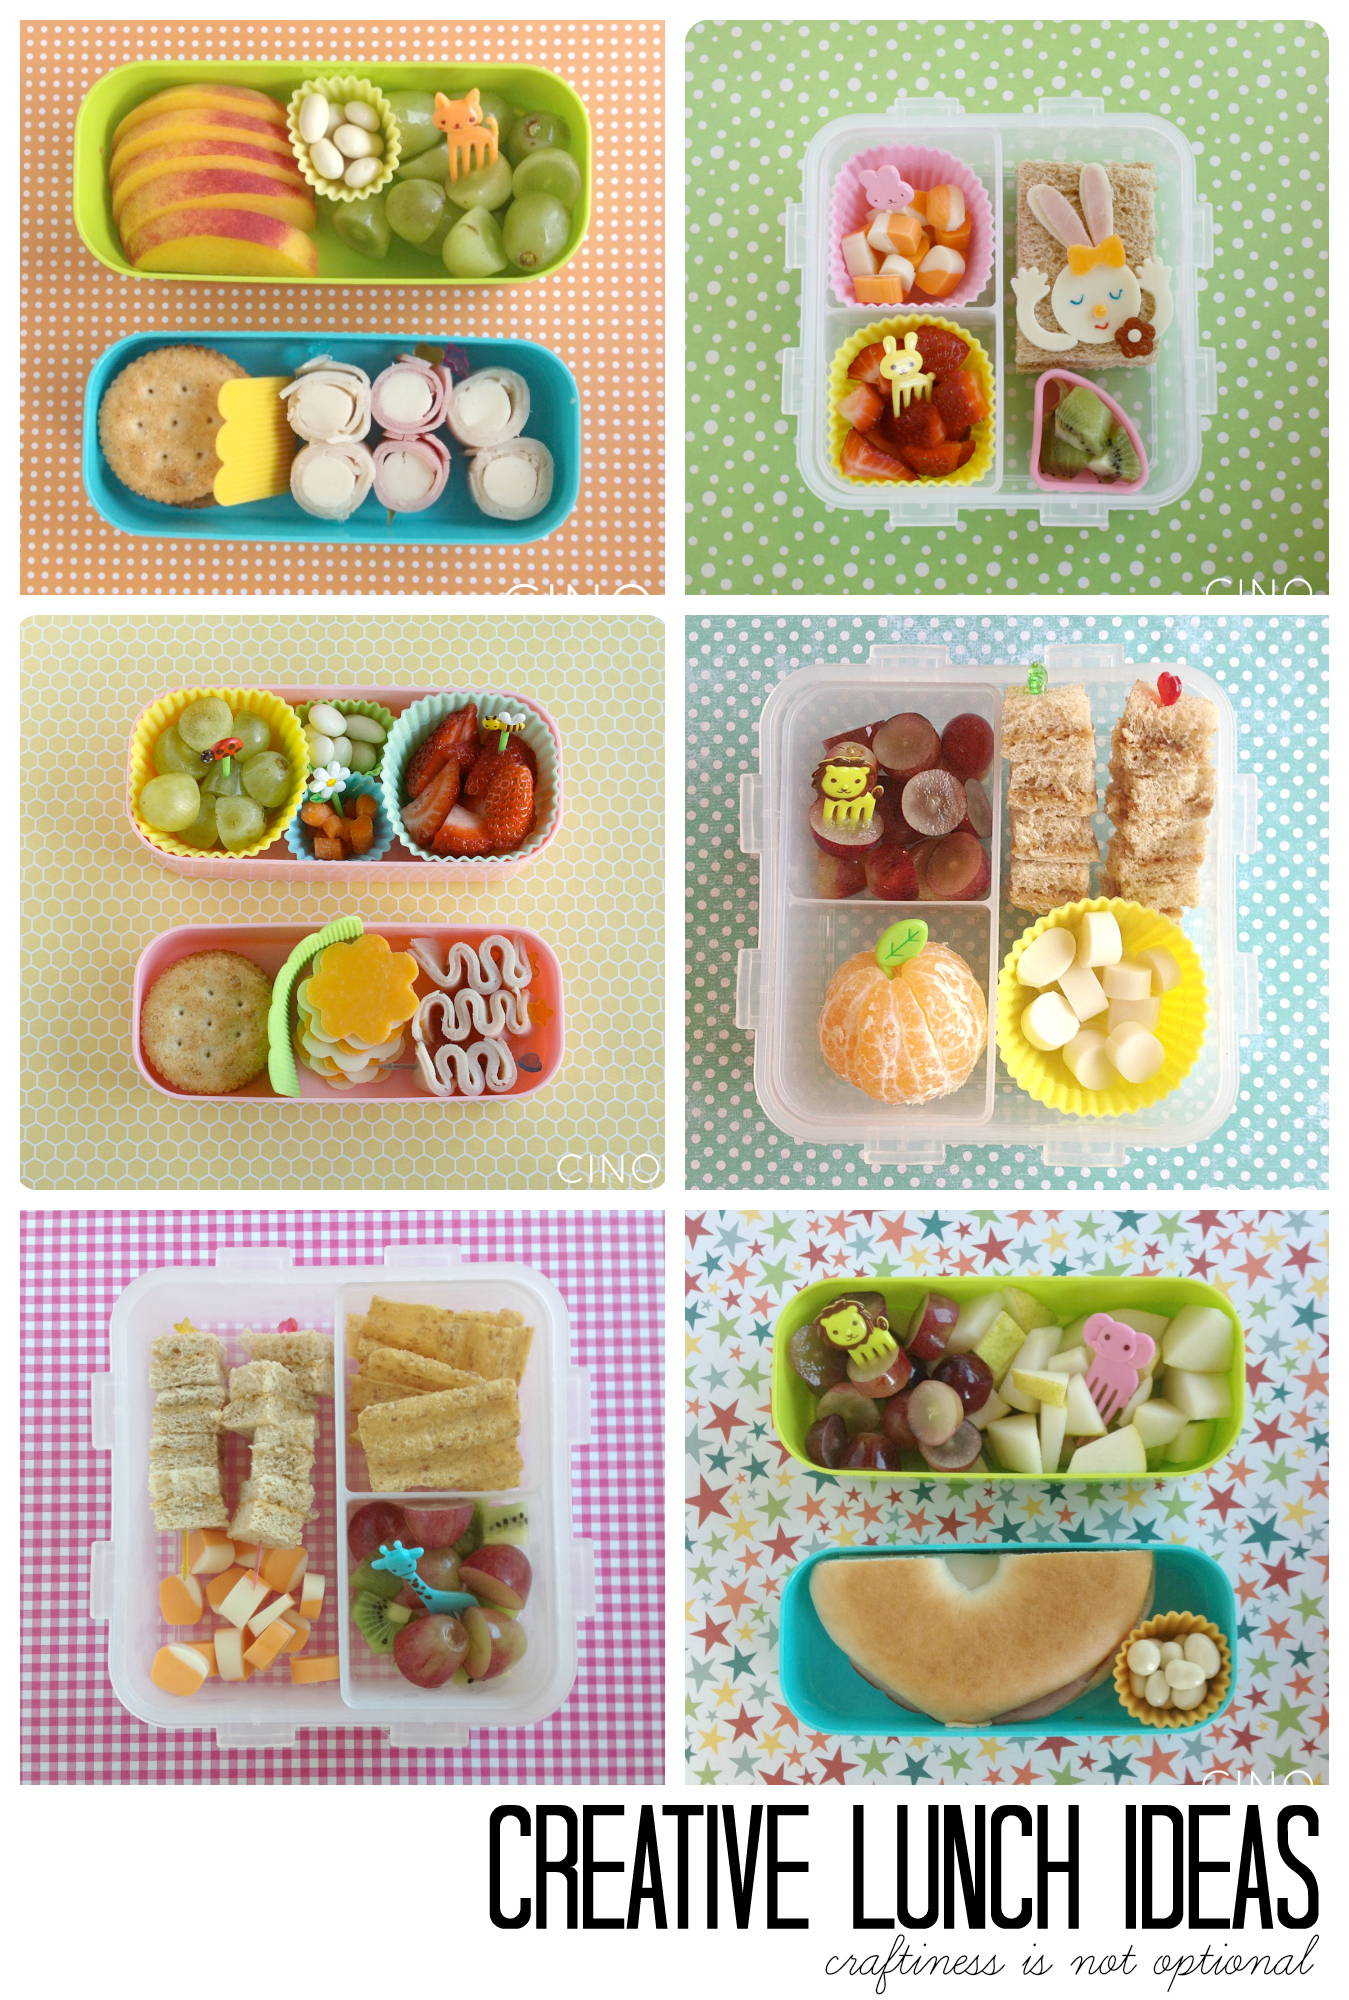 fun lunch ideas at craftiness is not optional